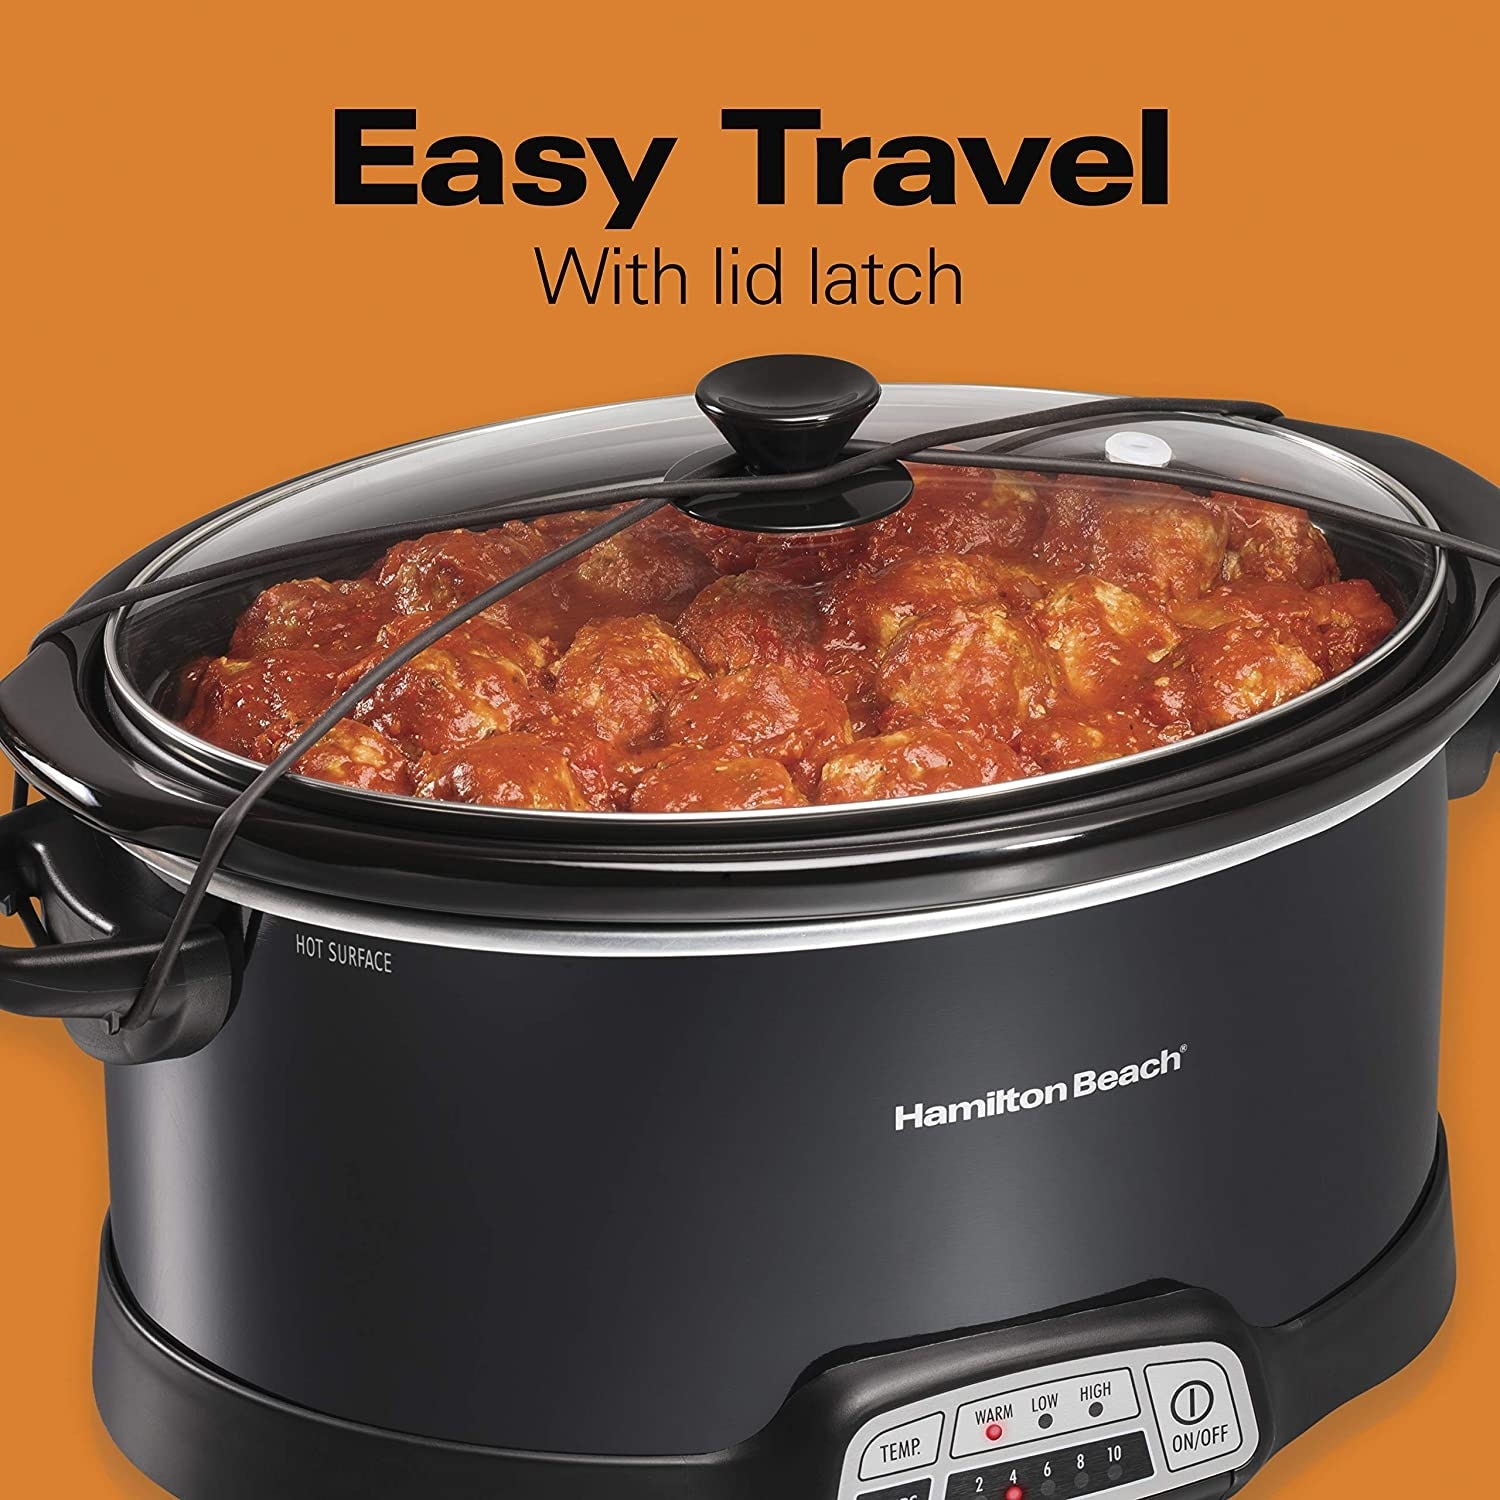 https://ak1.ostkcdn.com/images/products/is/images/direct/9def8c6302f6193f78131778048f3fd4ad56b346/Portable-7-Quart-Programmable-Slow-Cooker-with-Three-Temperature-Settings%2C-Lid-Latch-Strap-for-Easy-Travel.jpg